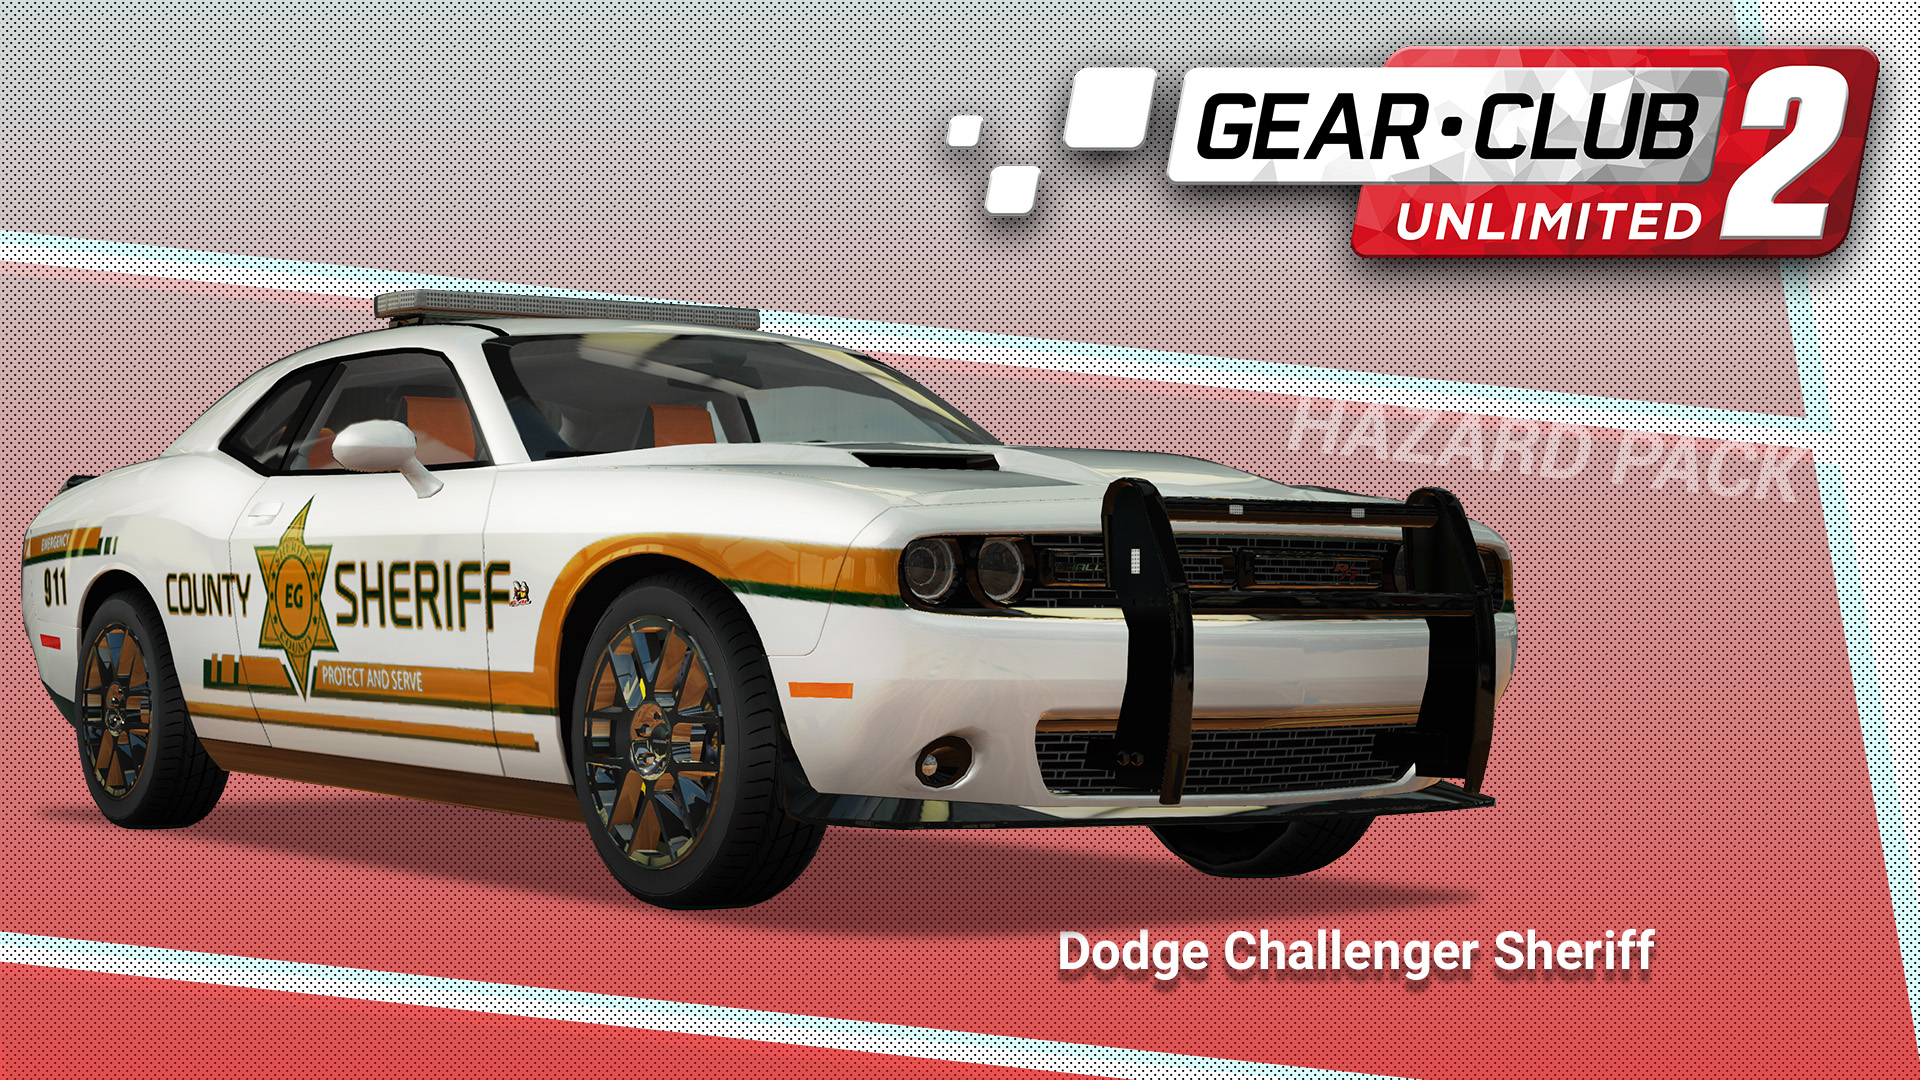 Dodge Challenger Sheriff - Gear.Club Unlimited 2